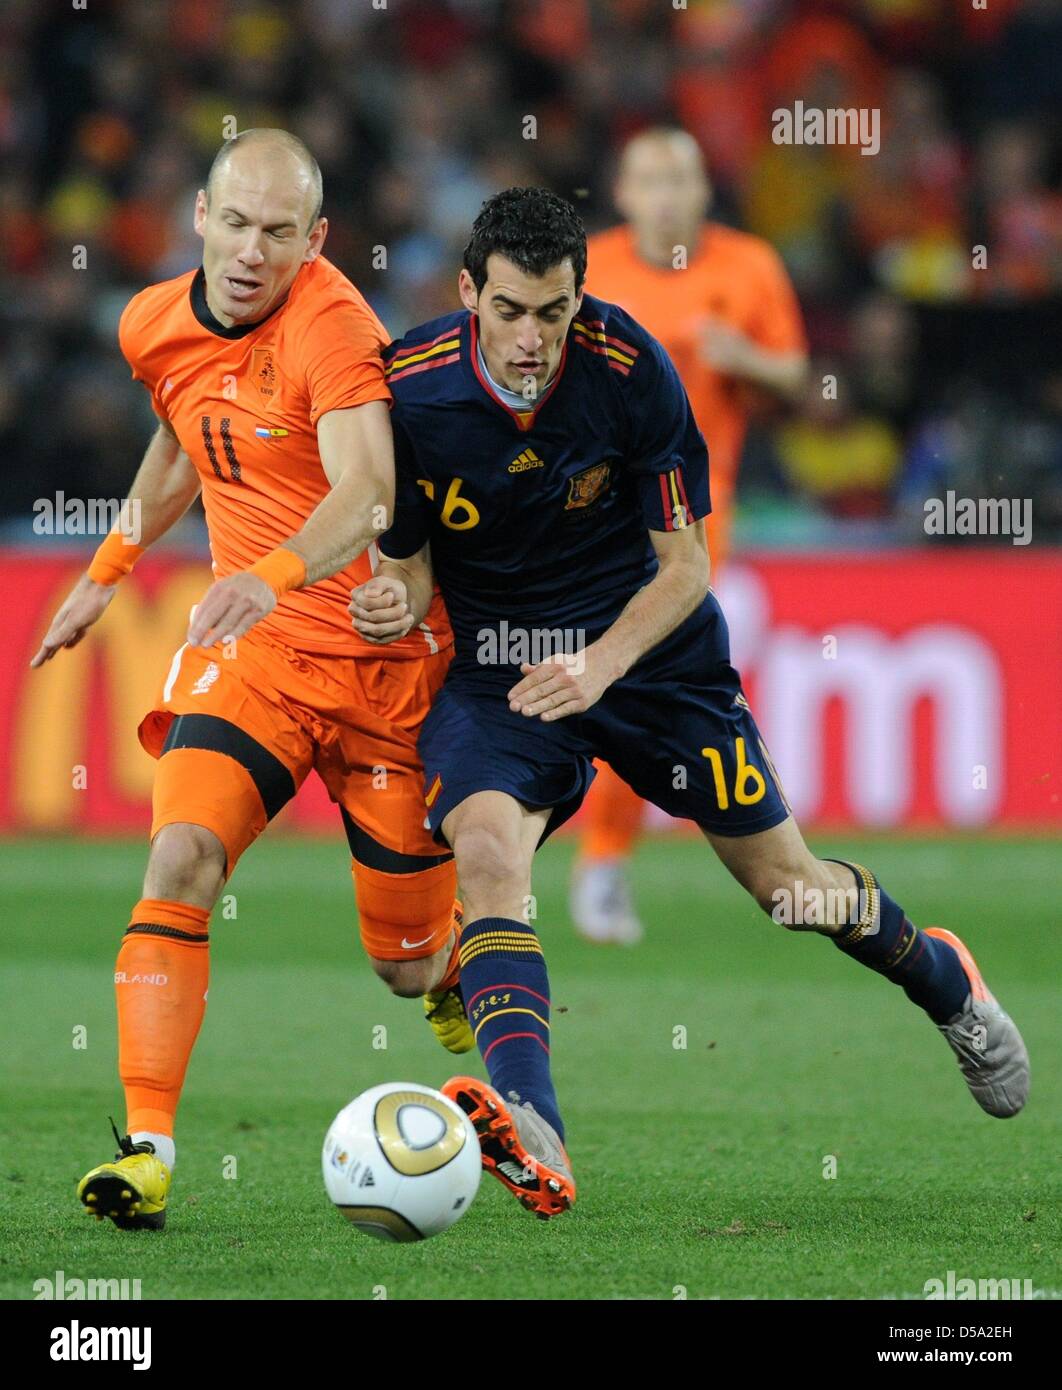 Dutch Arjen Robben (L) vies for the ball with Spain's Sergio Busquets during the 2010 FIFA World Cup final match between the Netherlands and Spain at Soccer City Stadium in Johannesburg, South Africa 11 July 2010. Photo: Marcus Brandt dpa - Please refer to http://dpaq.de/FIFA-WM2010-TC Stock Photo